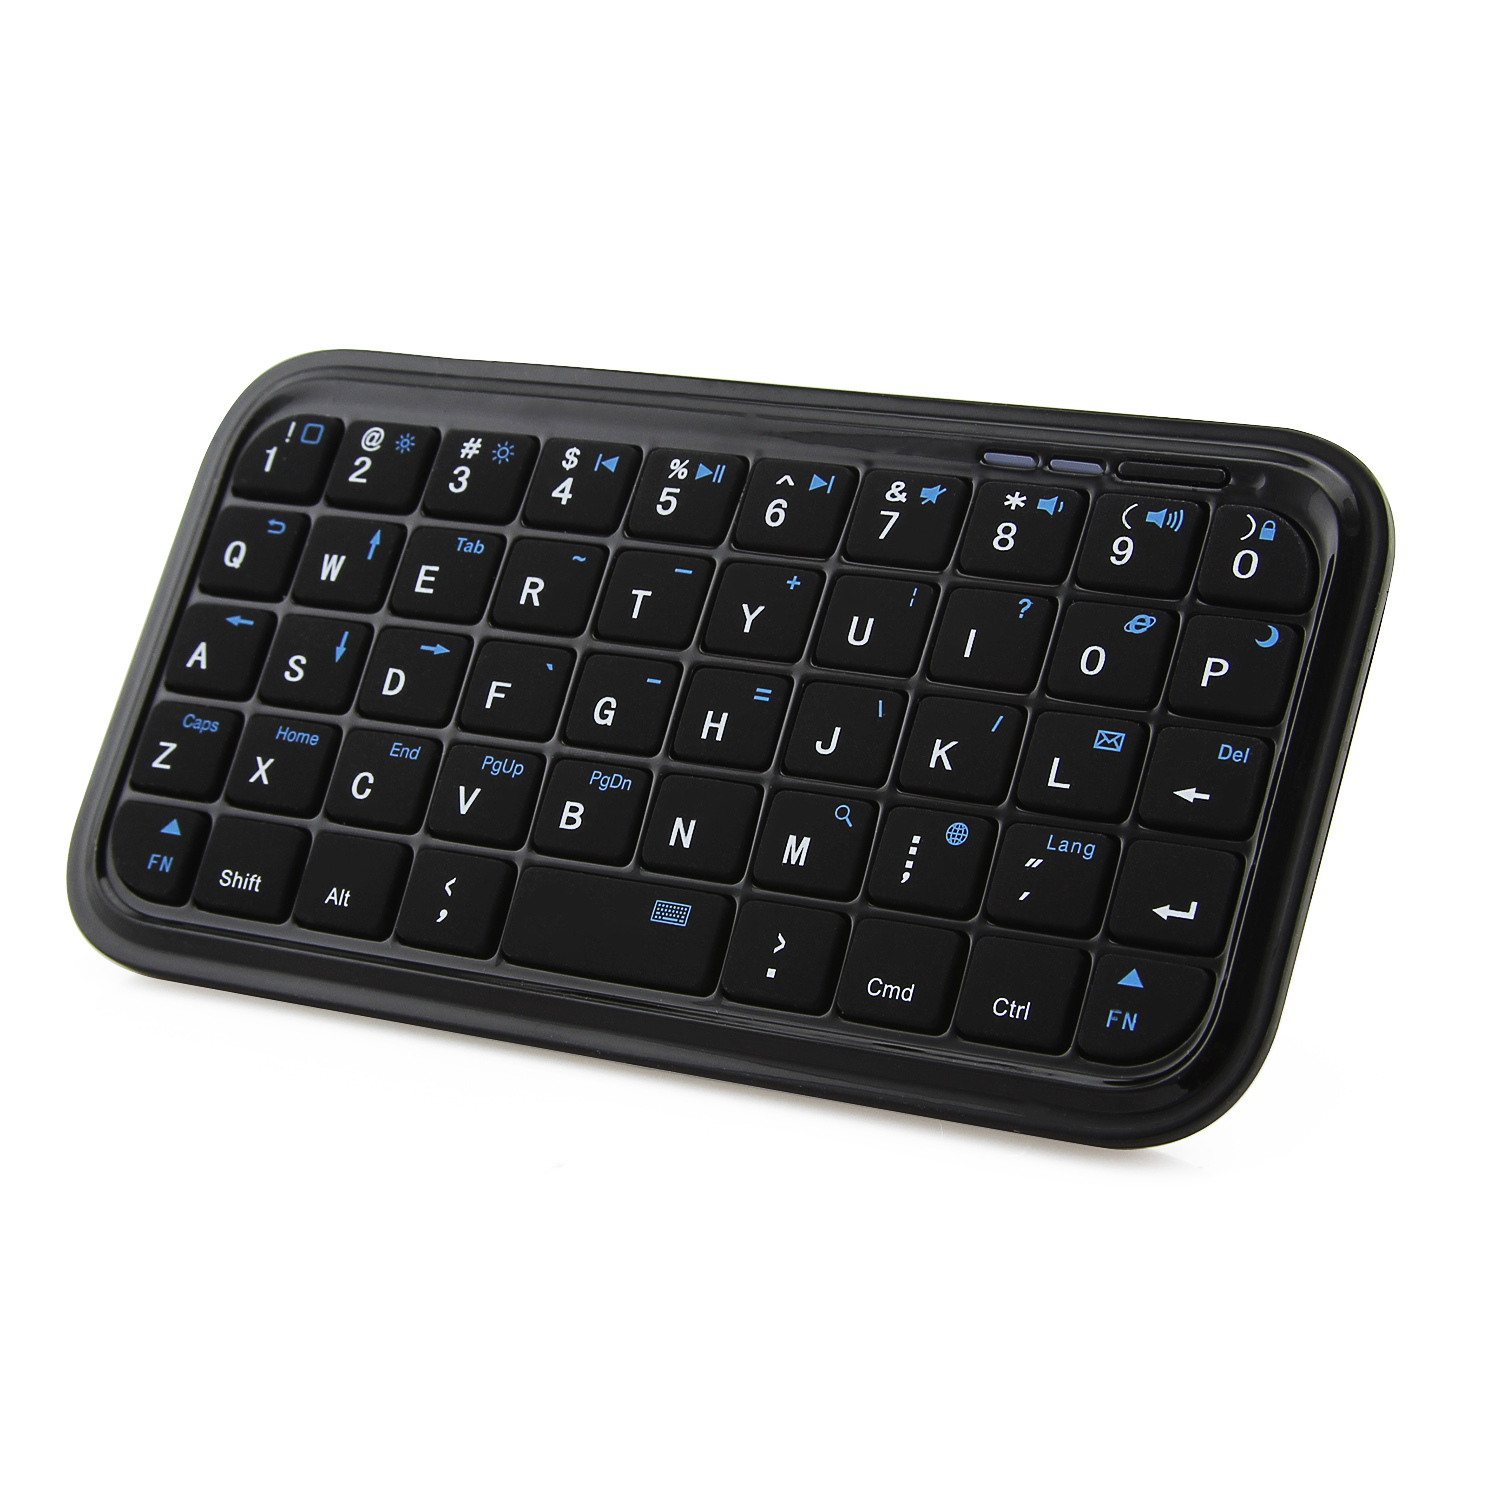 Bluetooth-Wireless-Mini-Keyboard-Slim-Black-Computer-Portable-Small-Hand-Keypad-For-iPhone-Android-Smart-Phone (5)